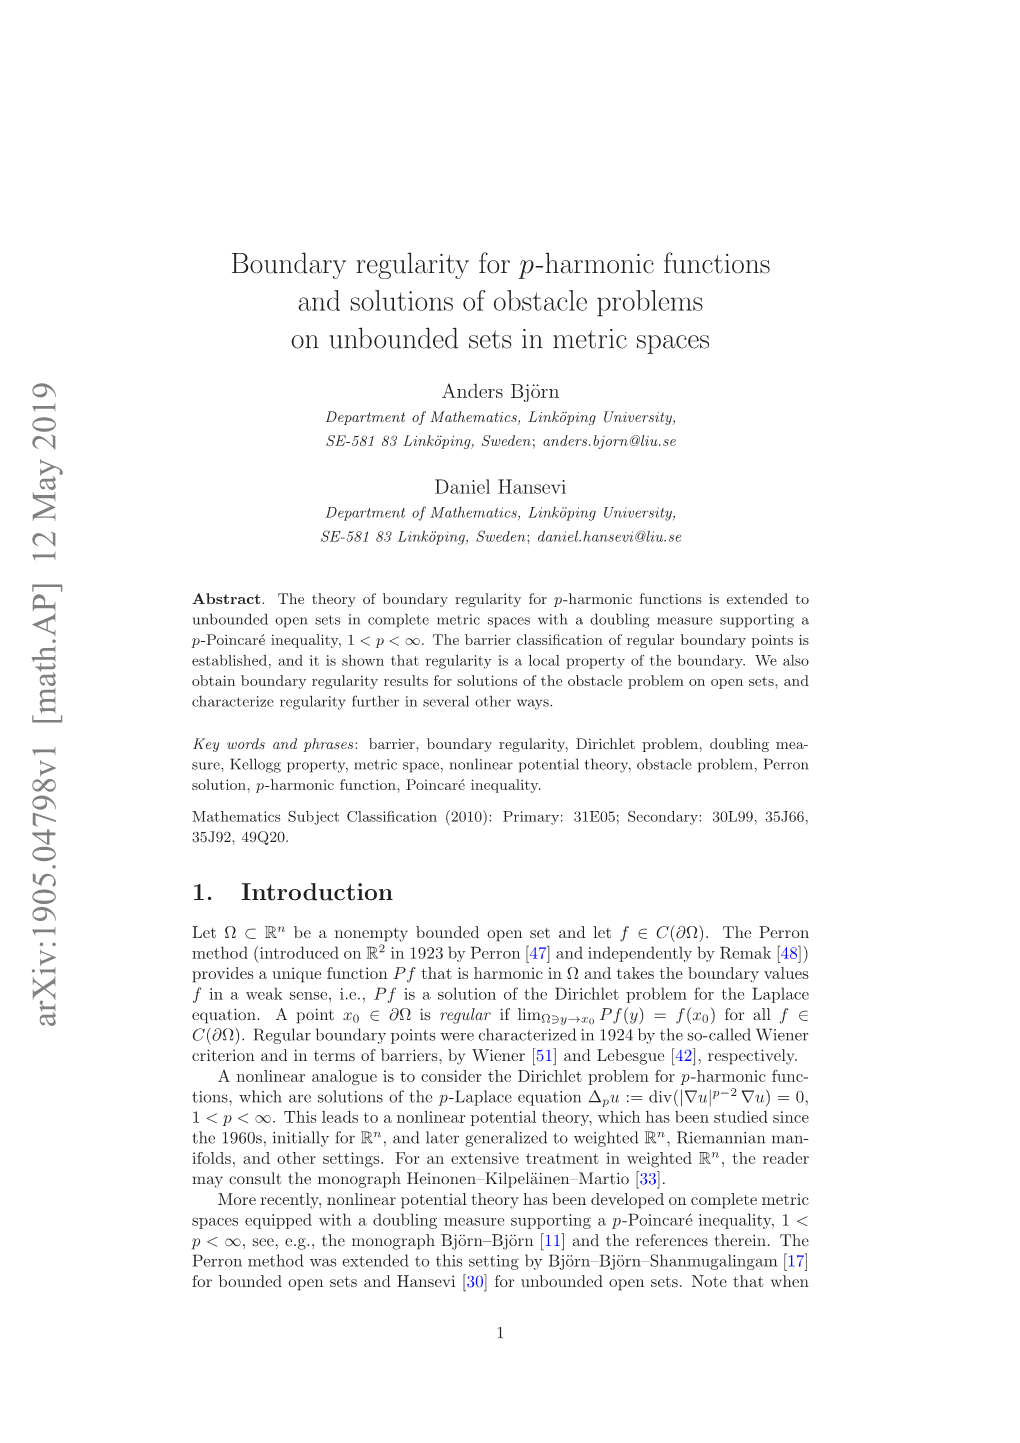 Boundary Regularity for P-Harmonic Functions and Solutions of Obstacle Problems on Unbounded Sets in Metric Spaces